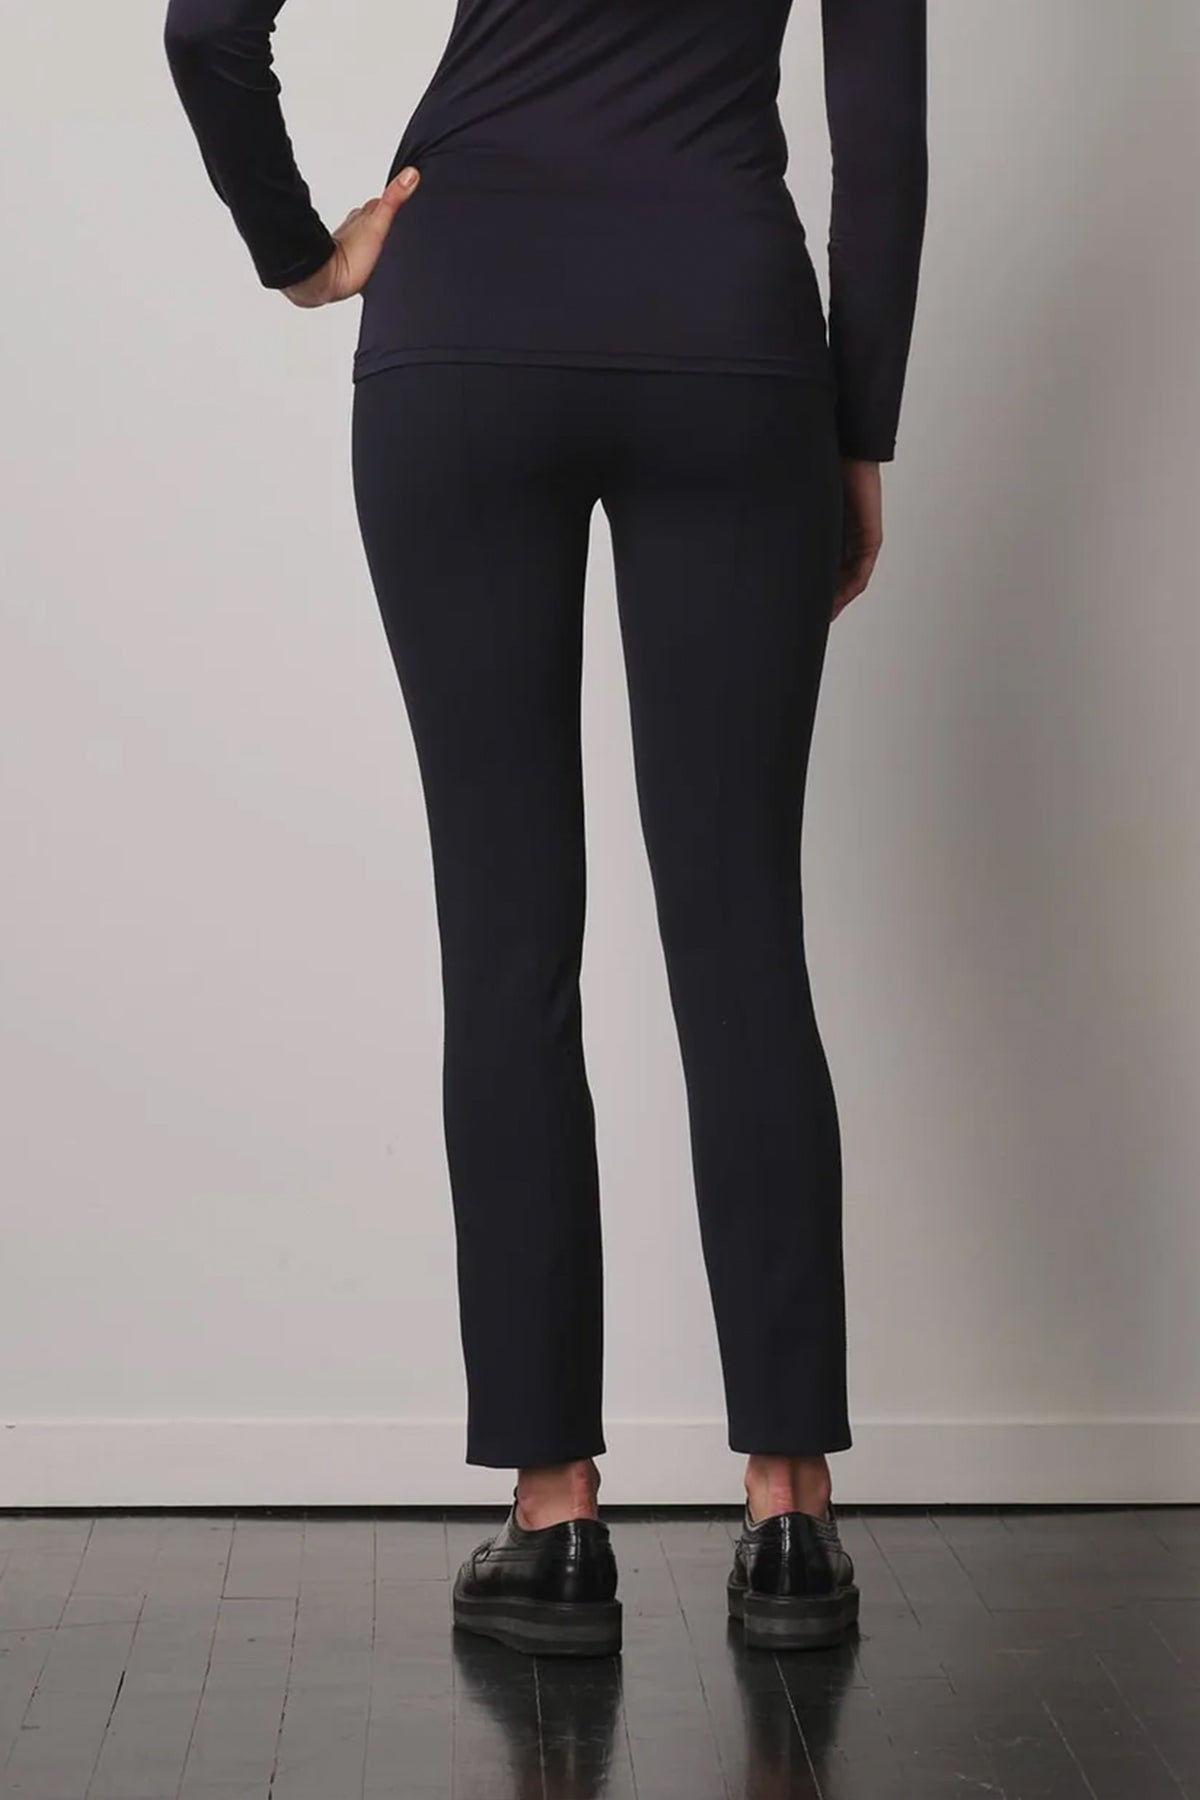 Max Freedom Pant in Navy - shop-olivia.com